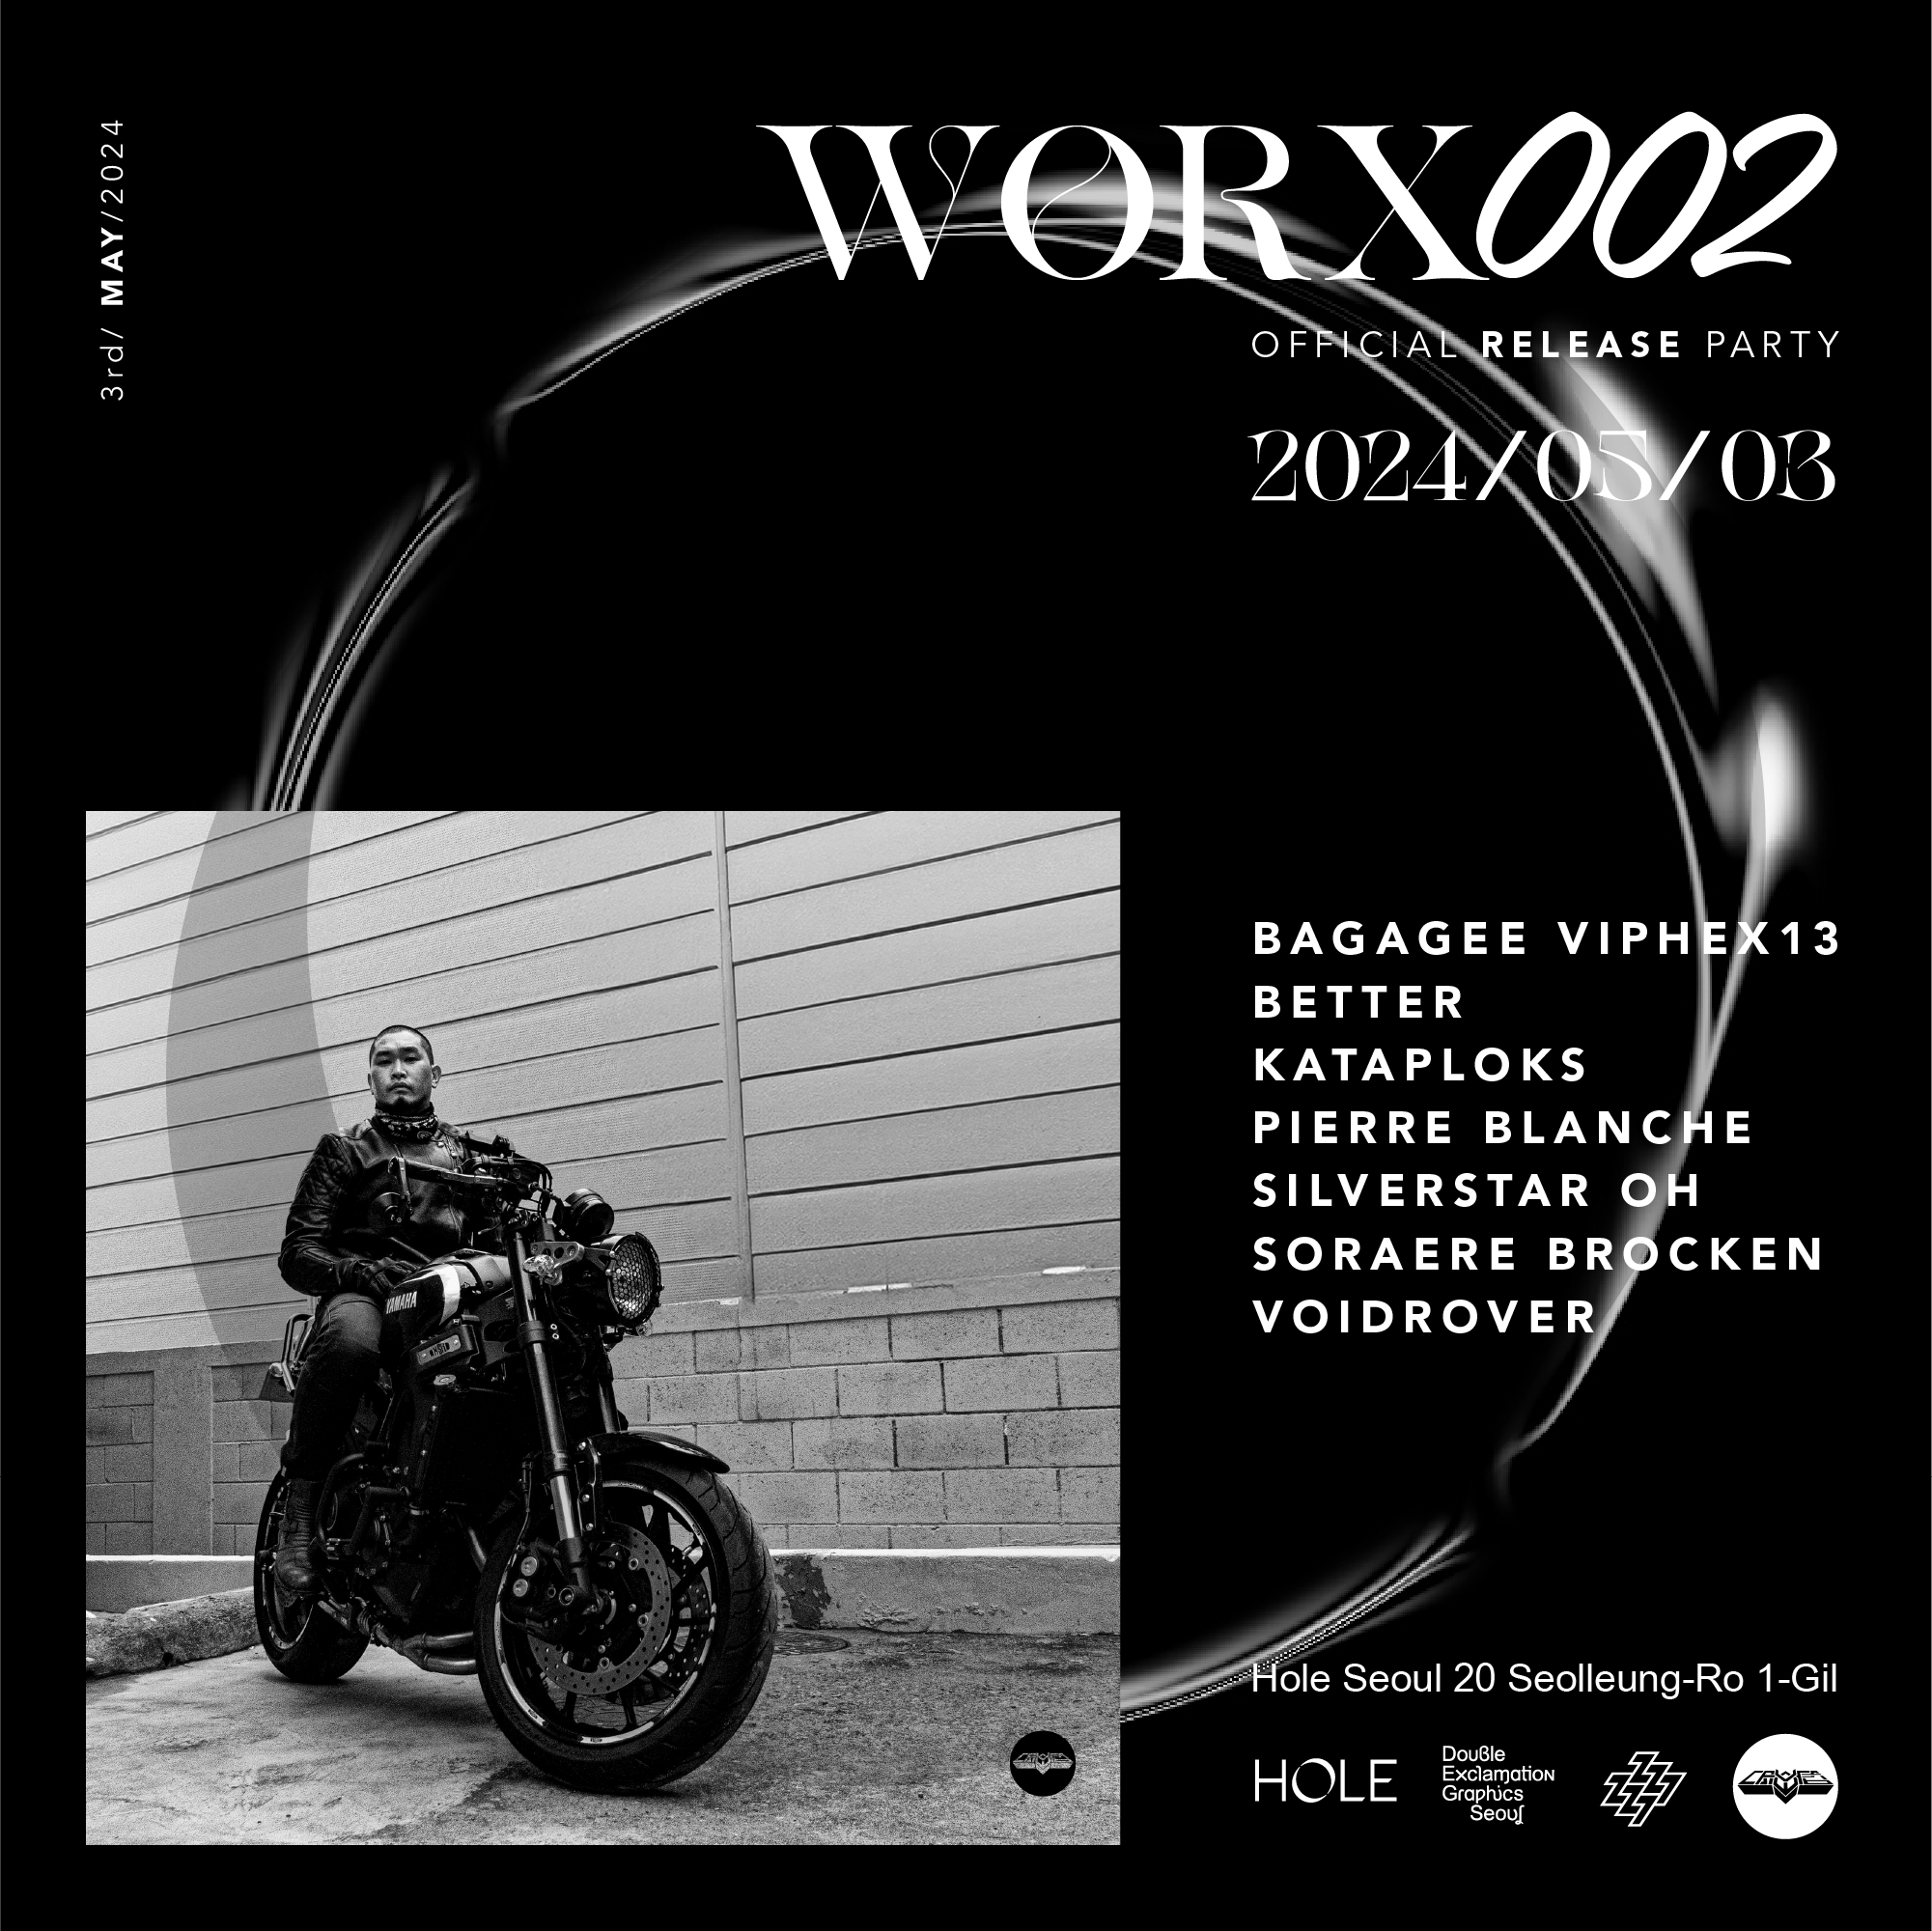 WORX002 Official Release Party - フライヤー表